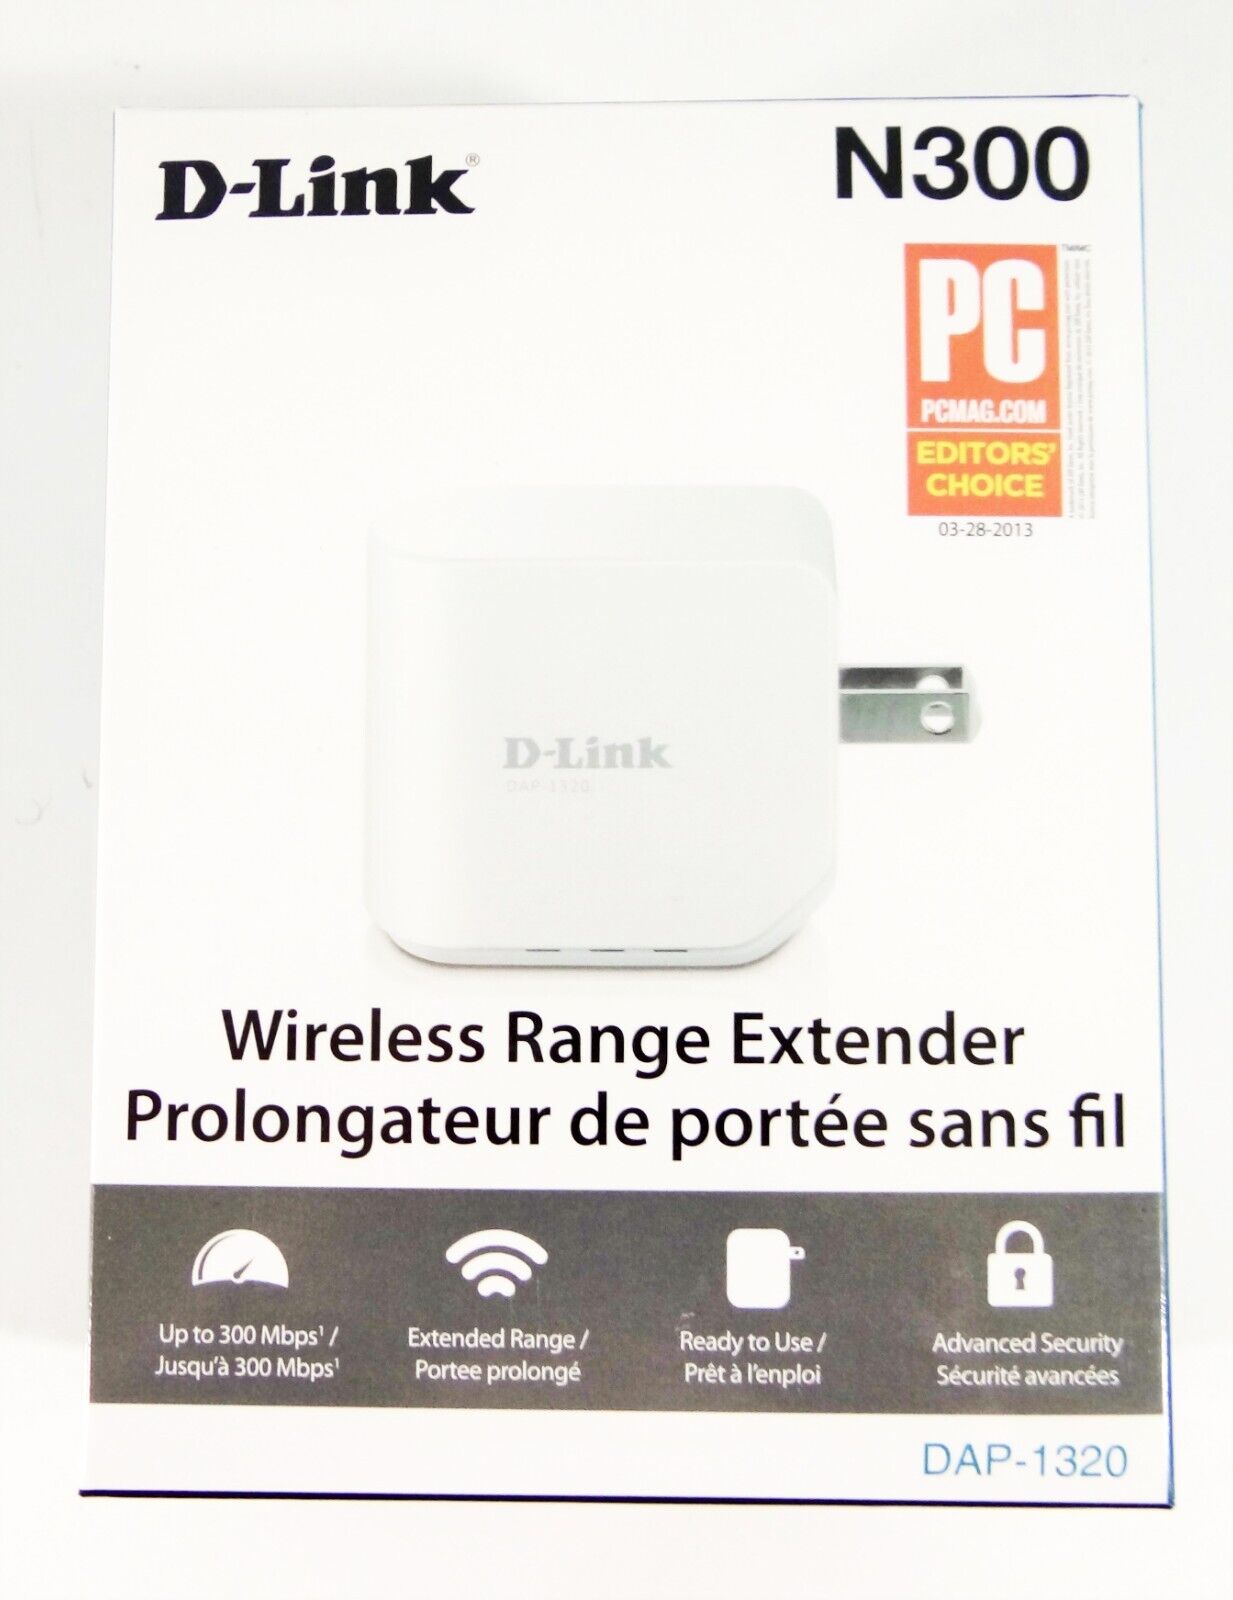 D-Link DAP-1320 Wireless N300 Range Extender Used Complete with Box and Manuals